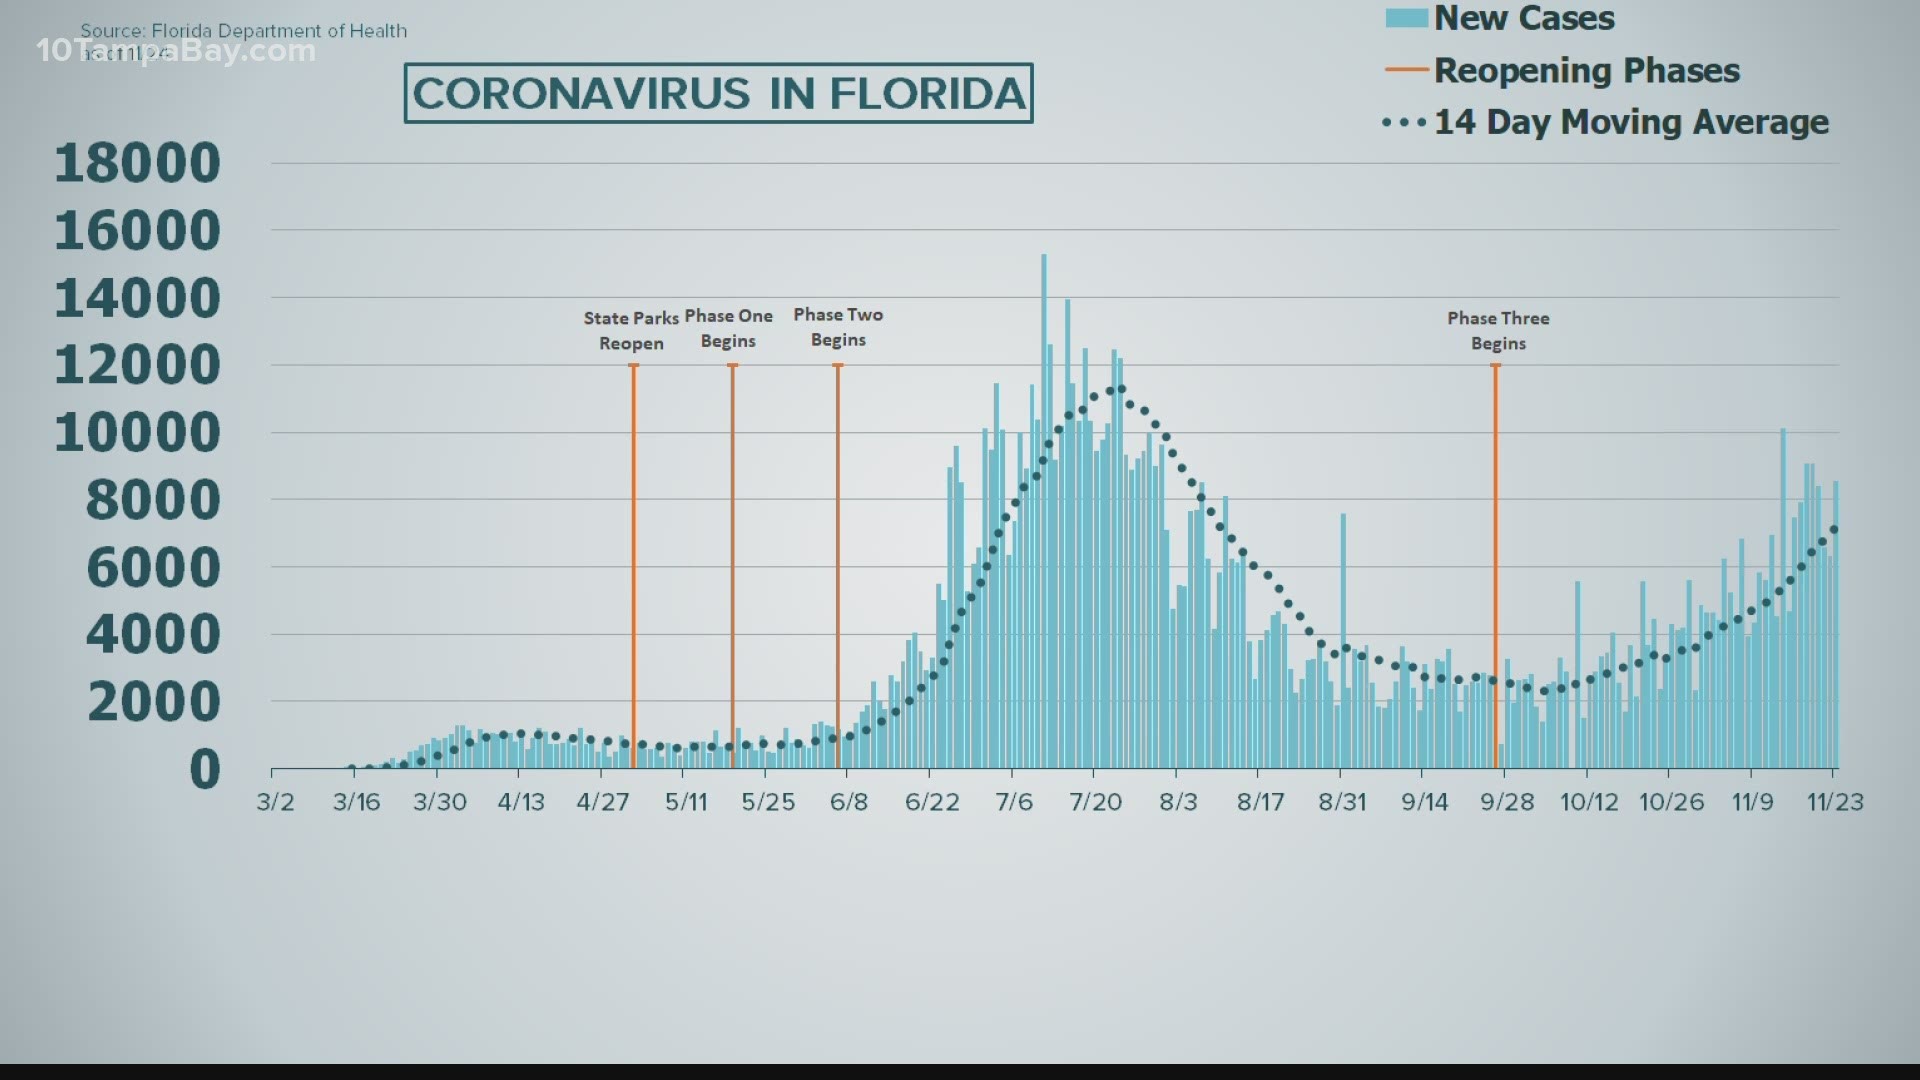 A total of 953,300 people have tested positive in Florida since the pandemic began.